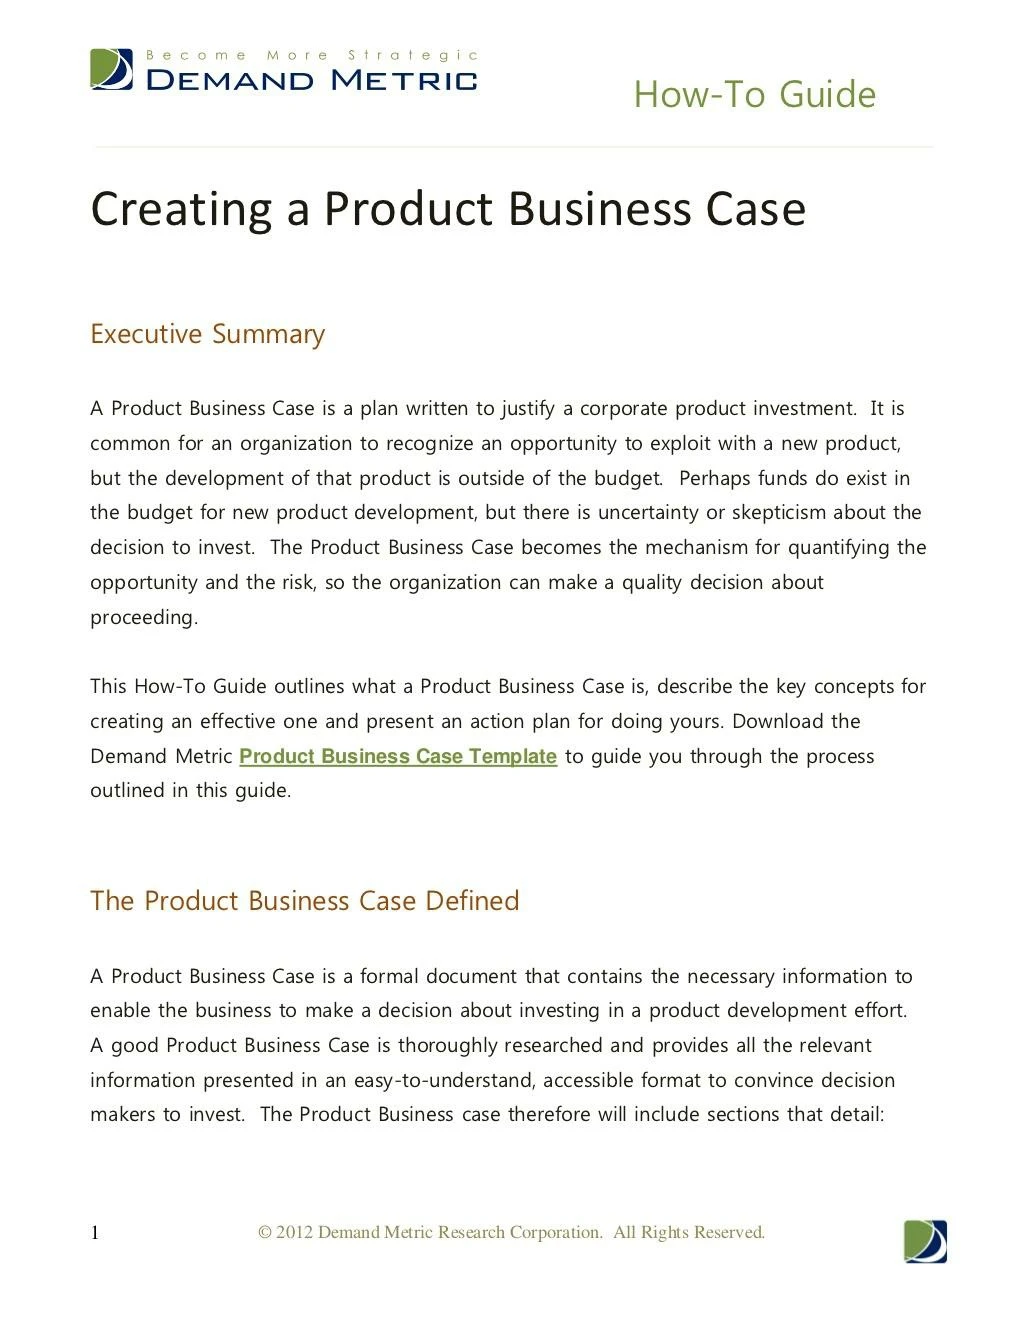 how to guide creating a product business case